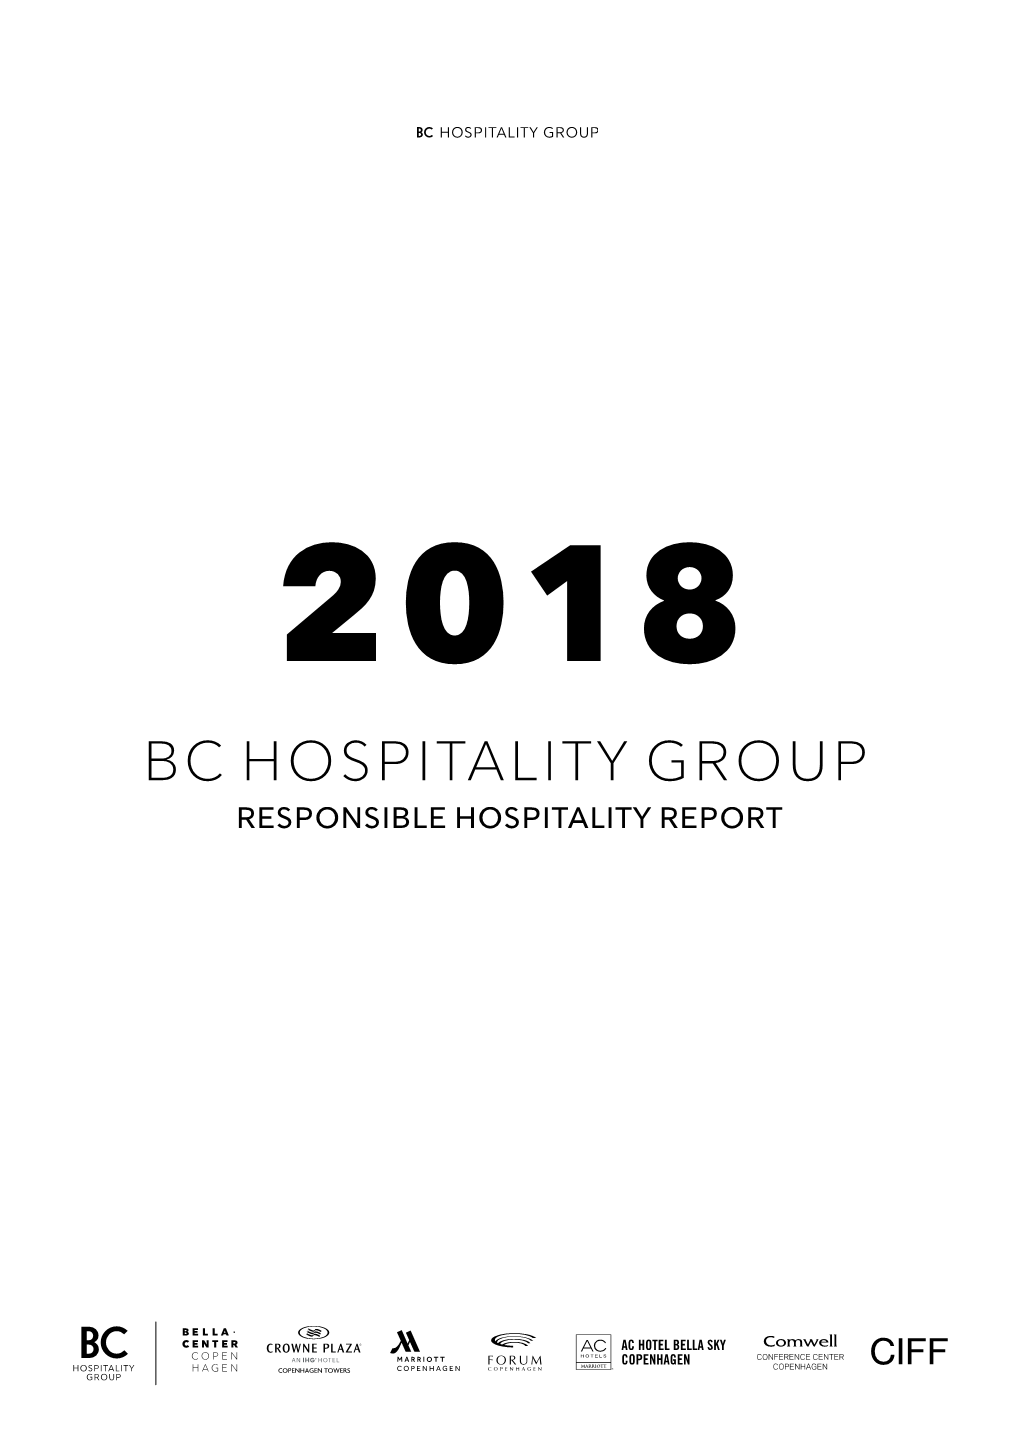 Responsible Hospitality Report